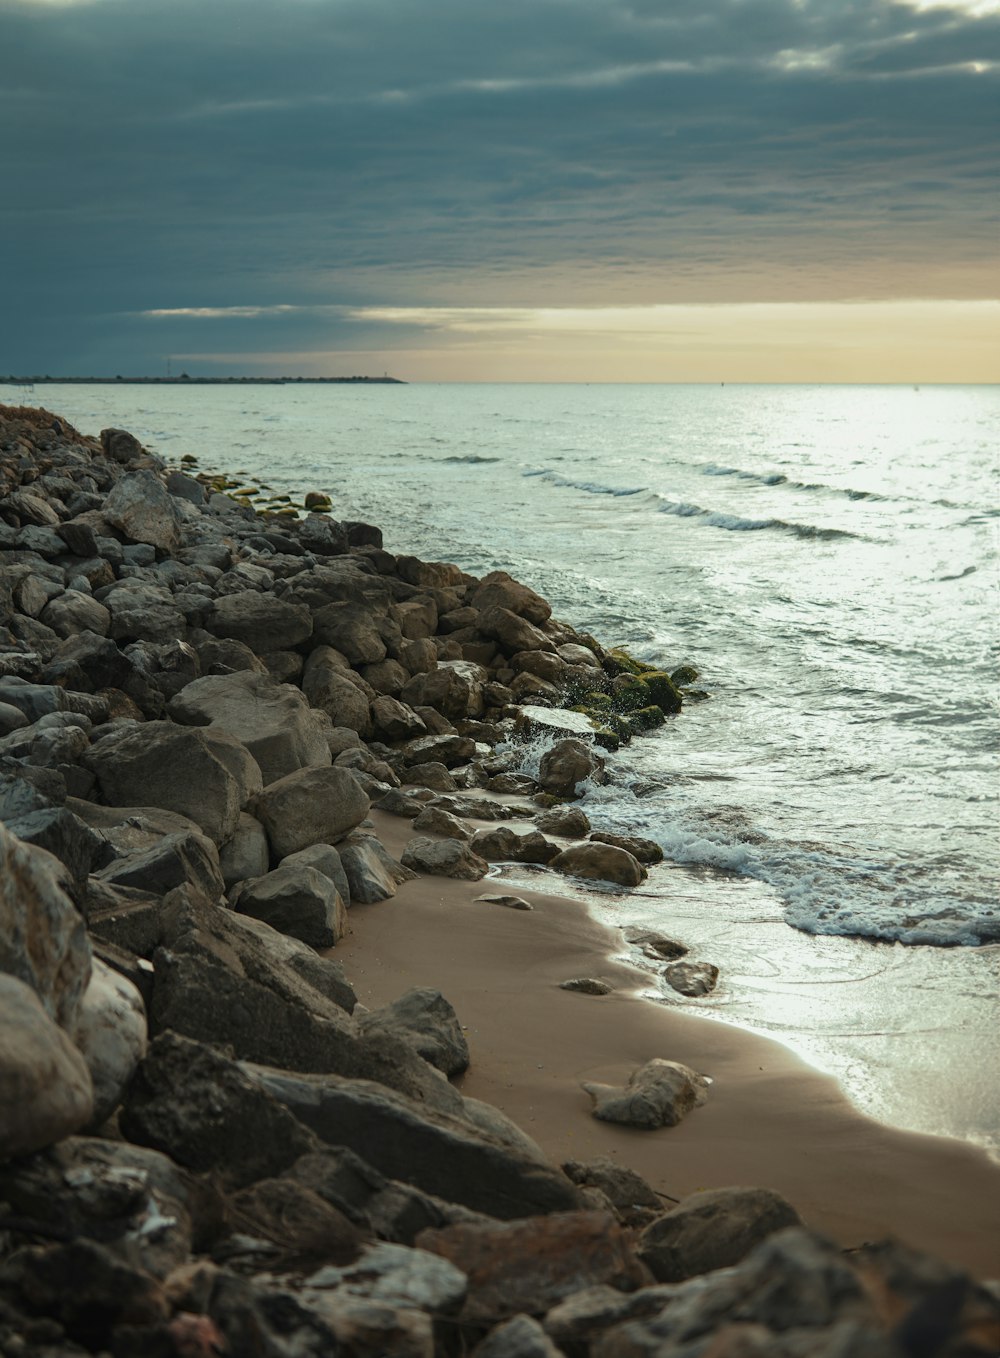 a beach with rocks and water under a cloudy sky